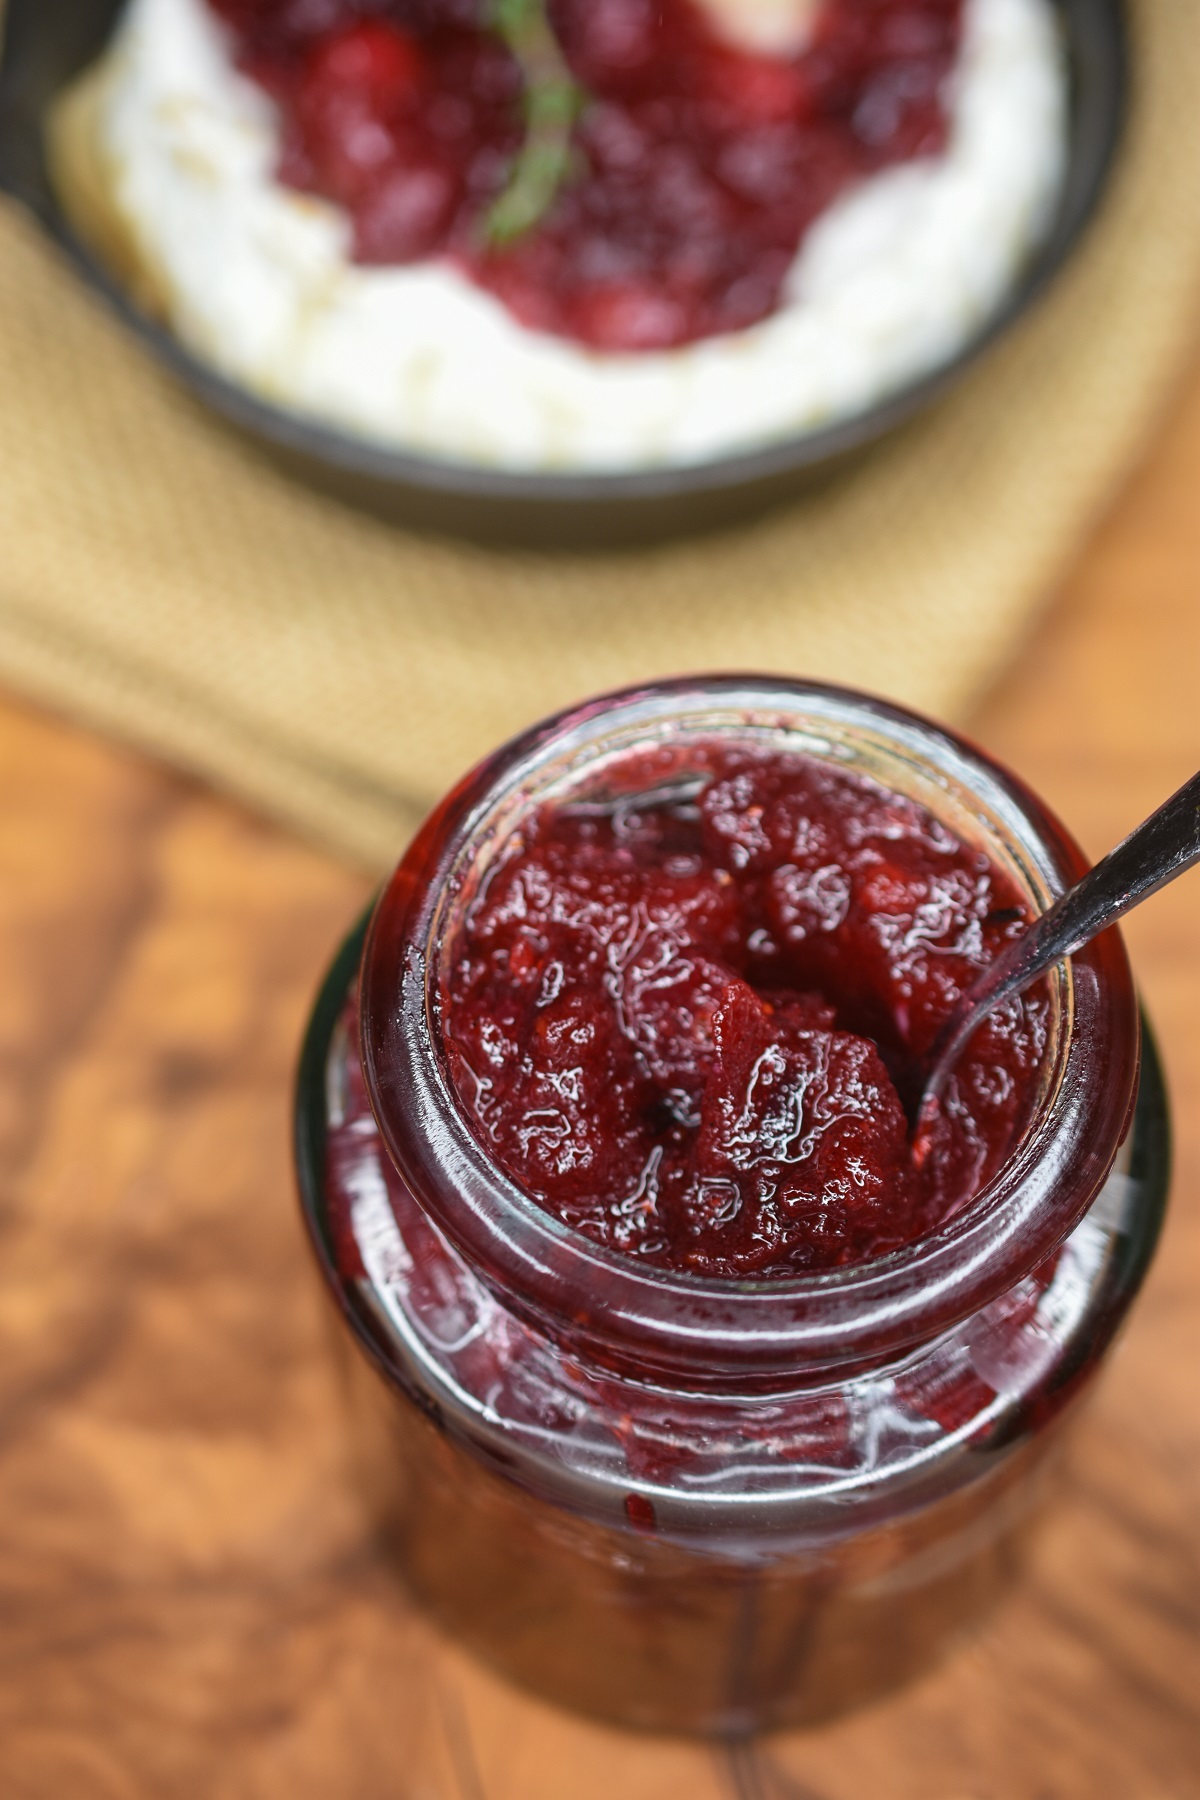 Homemade Cranberry Jam is must make holiday recipe while fresh cranberries are available. 